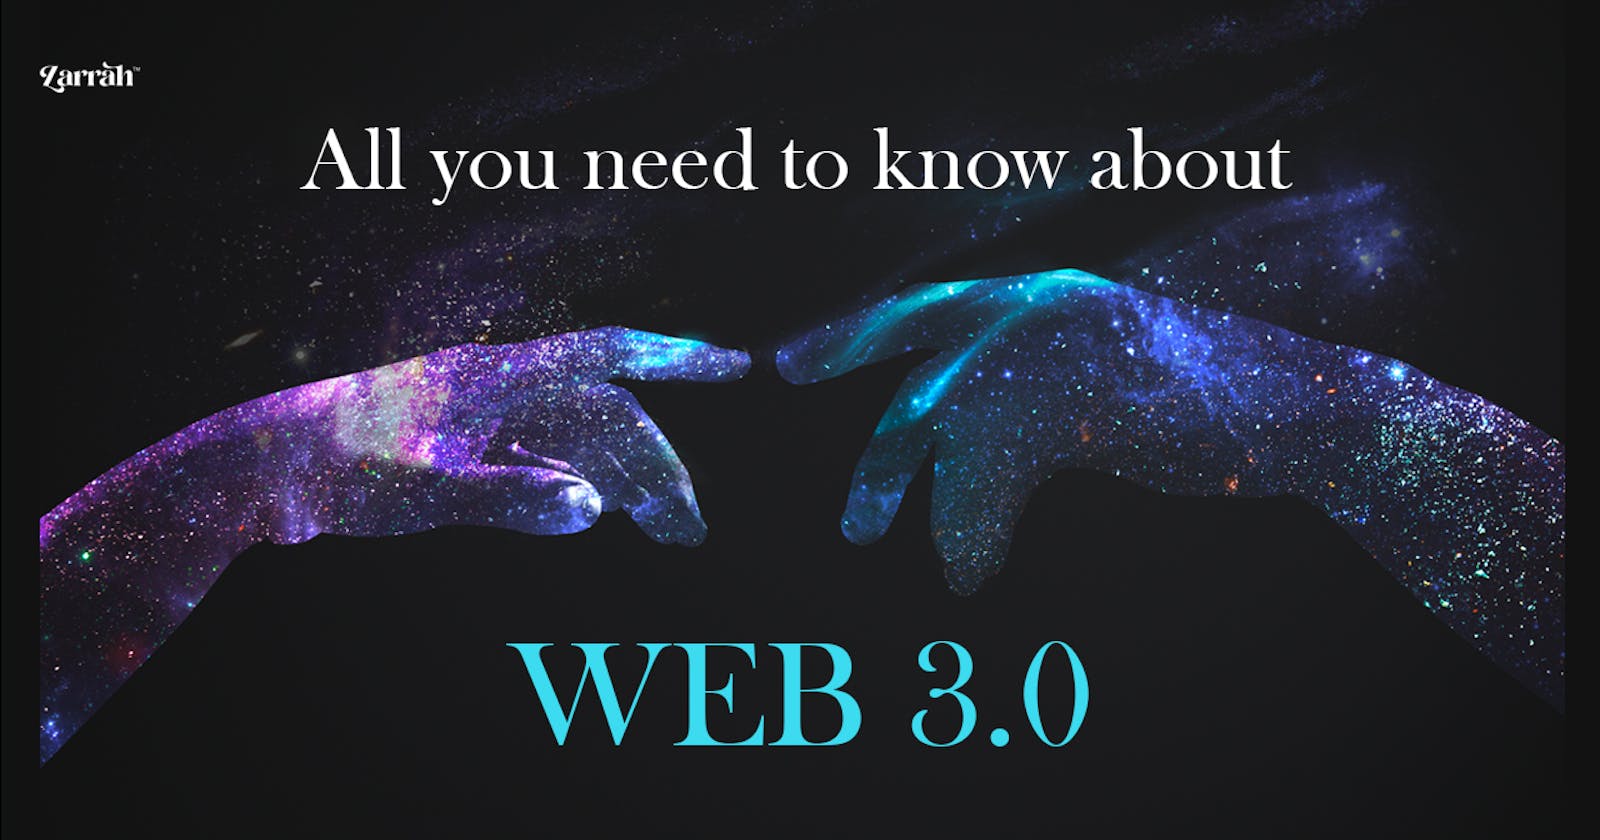 All you need to know about Web 3.